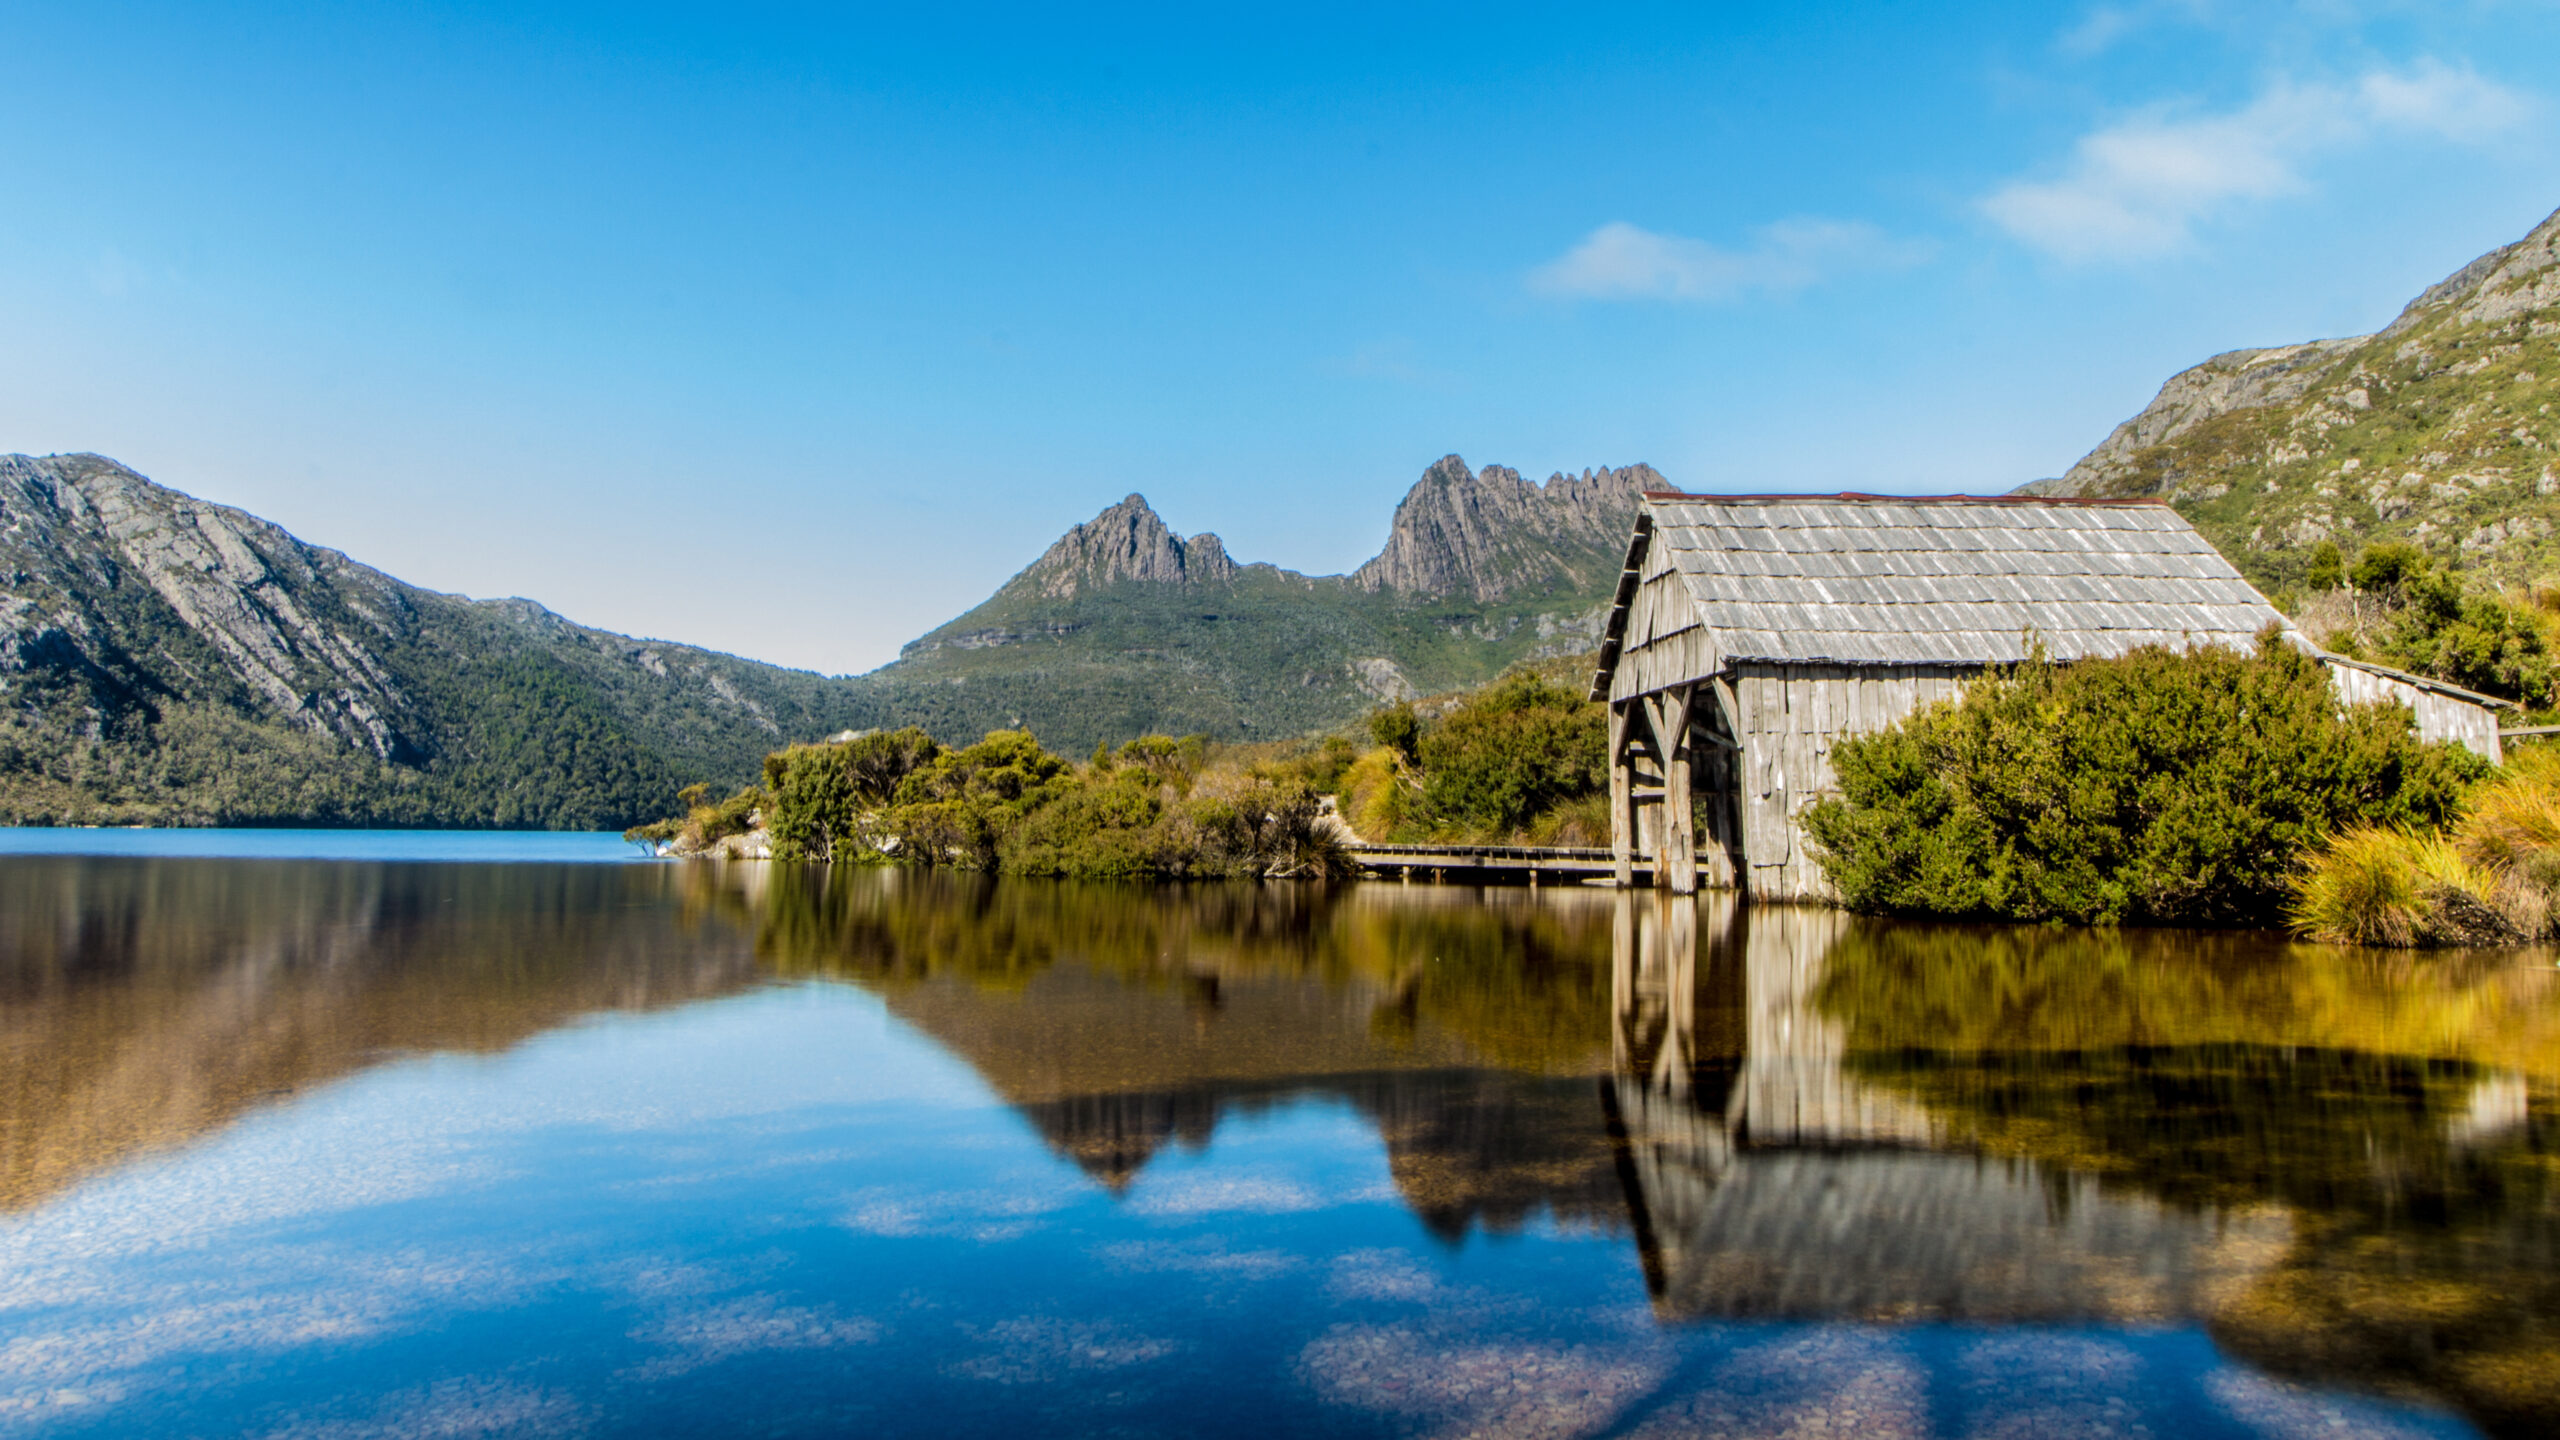 View of a hut on the edge of a lake in Cradle Mountain, one of Tasmania's most romantic getaway locations - Luxury Escapes